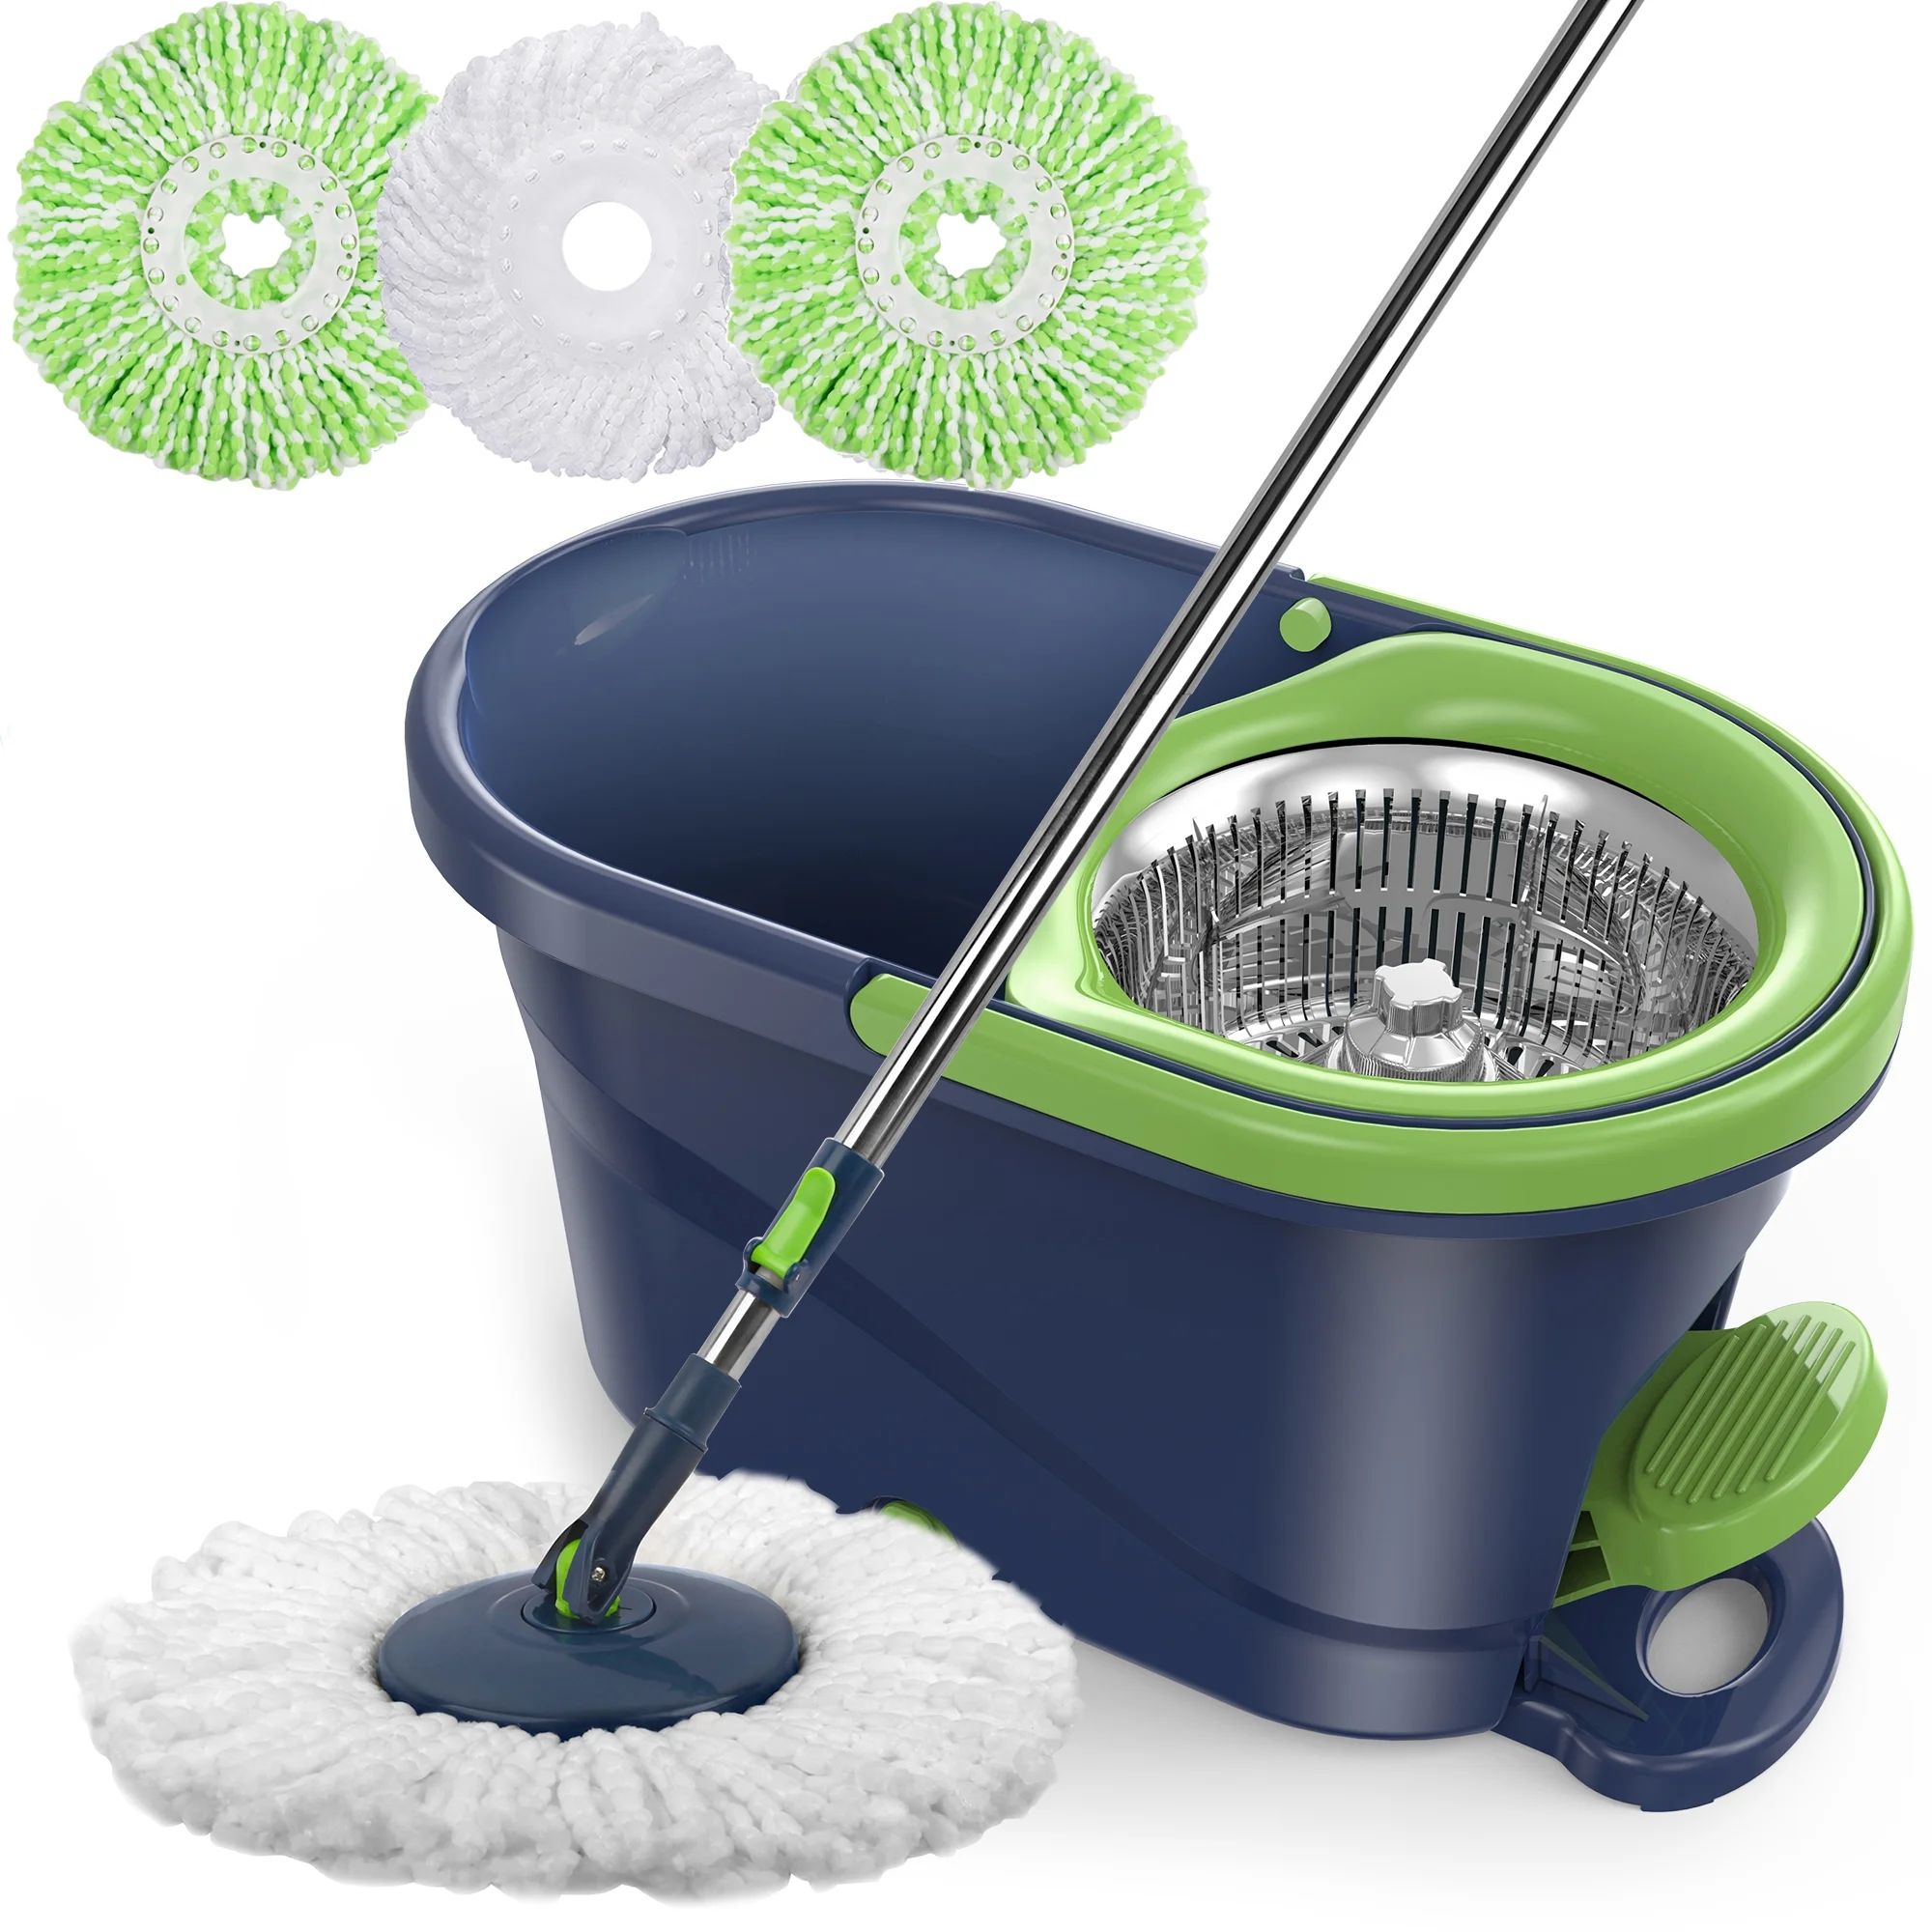 SUGARDAY Spin Mop and Bucket with Wringer Set for Floors Cleaning Heavy duty System, Green | Walmart (US)